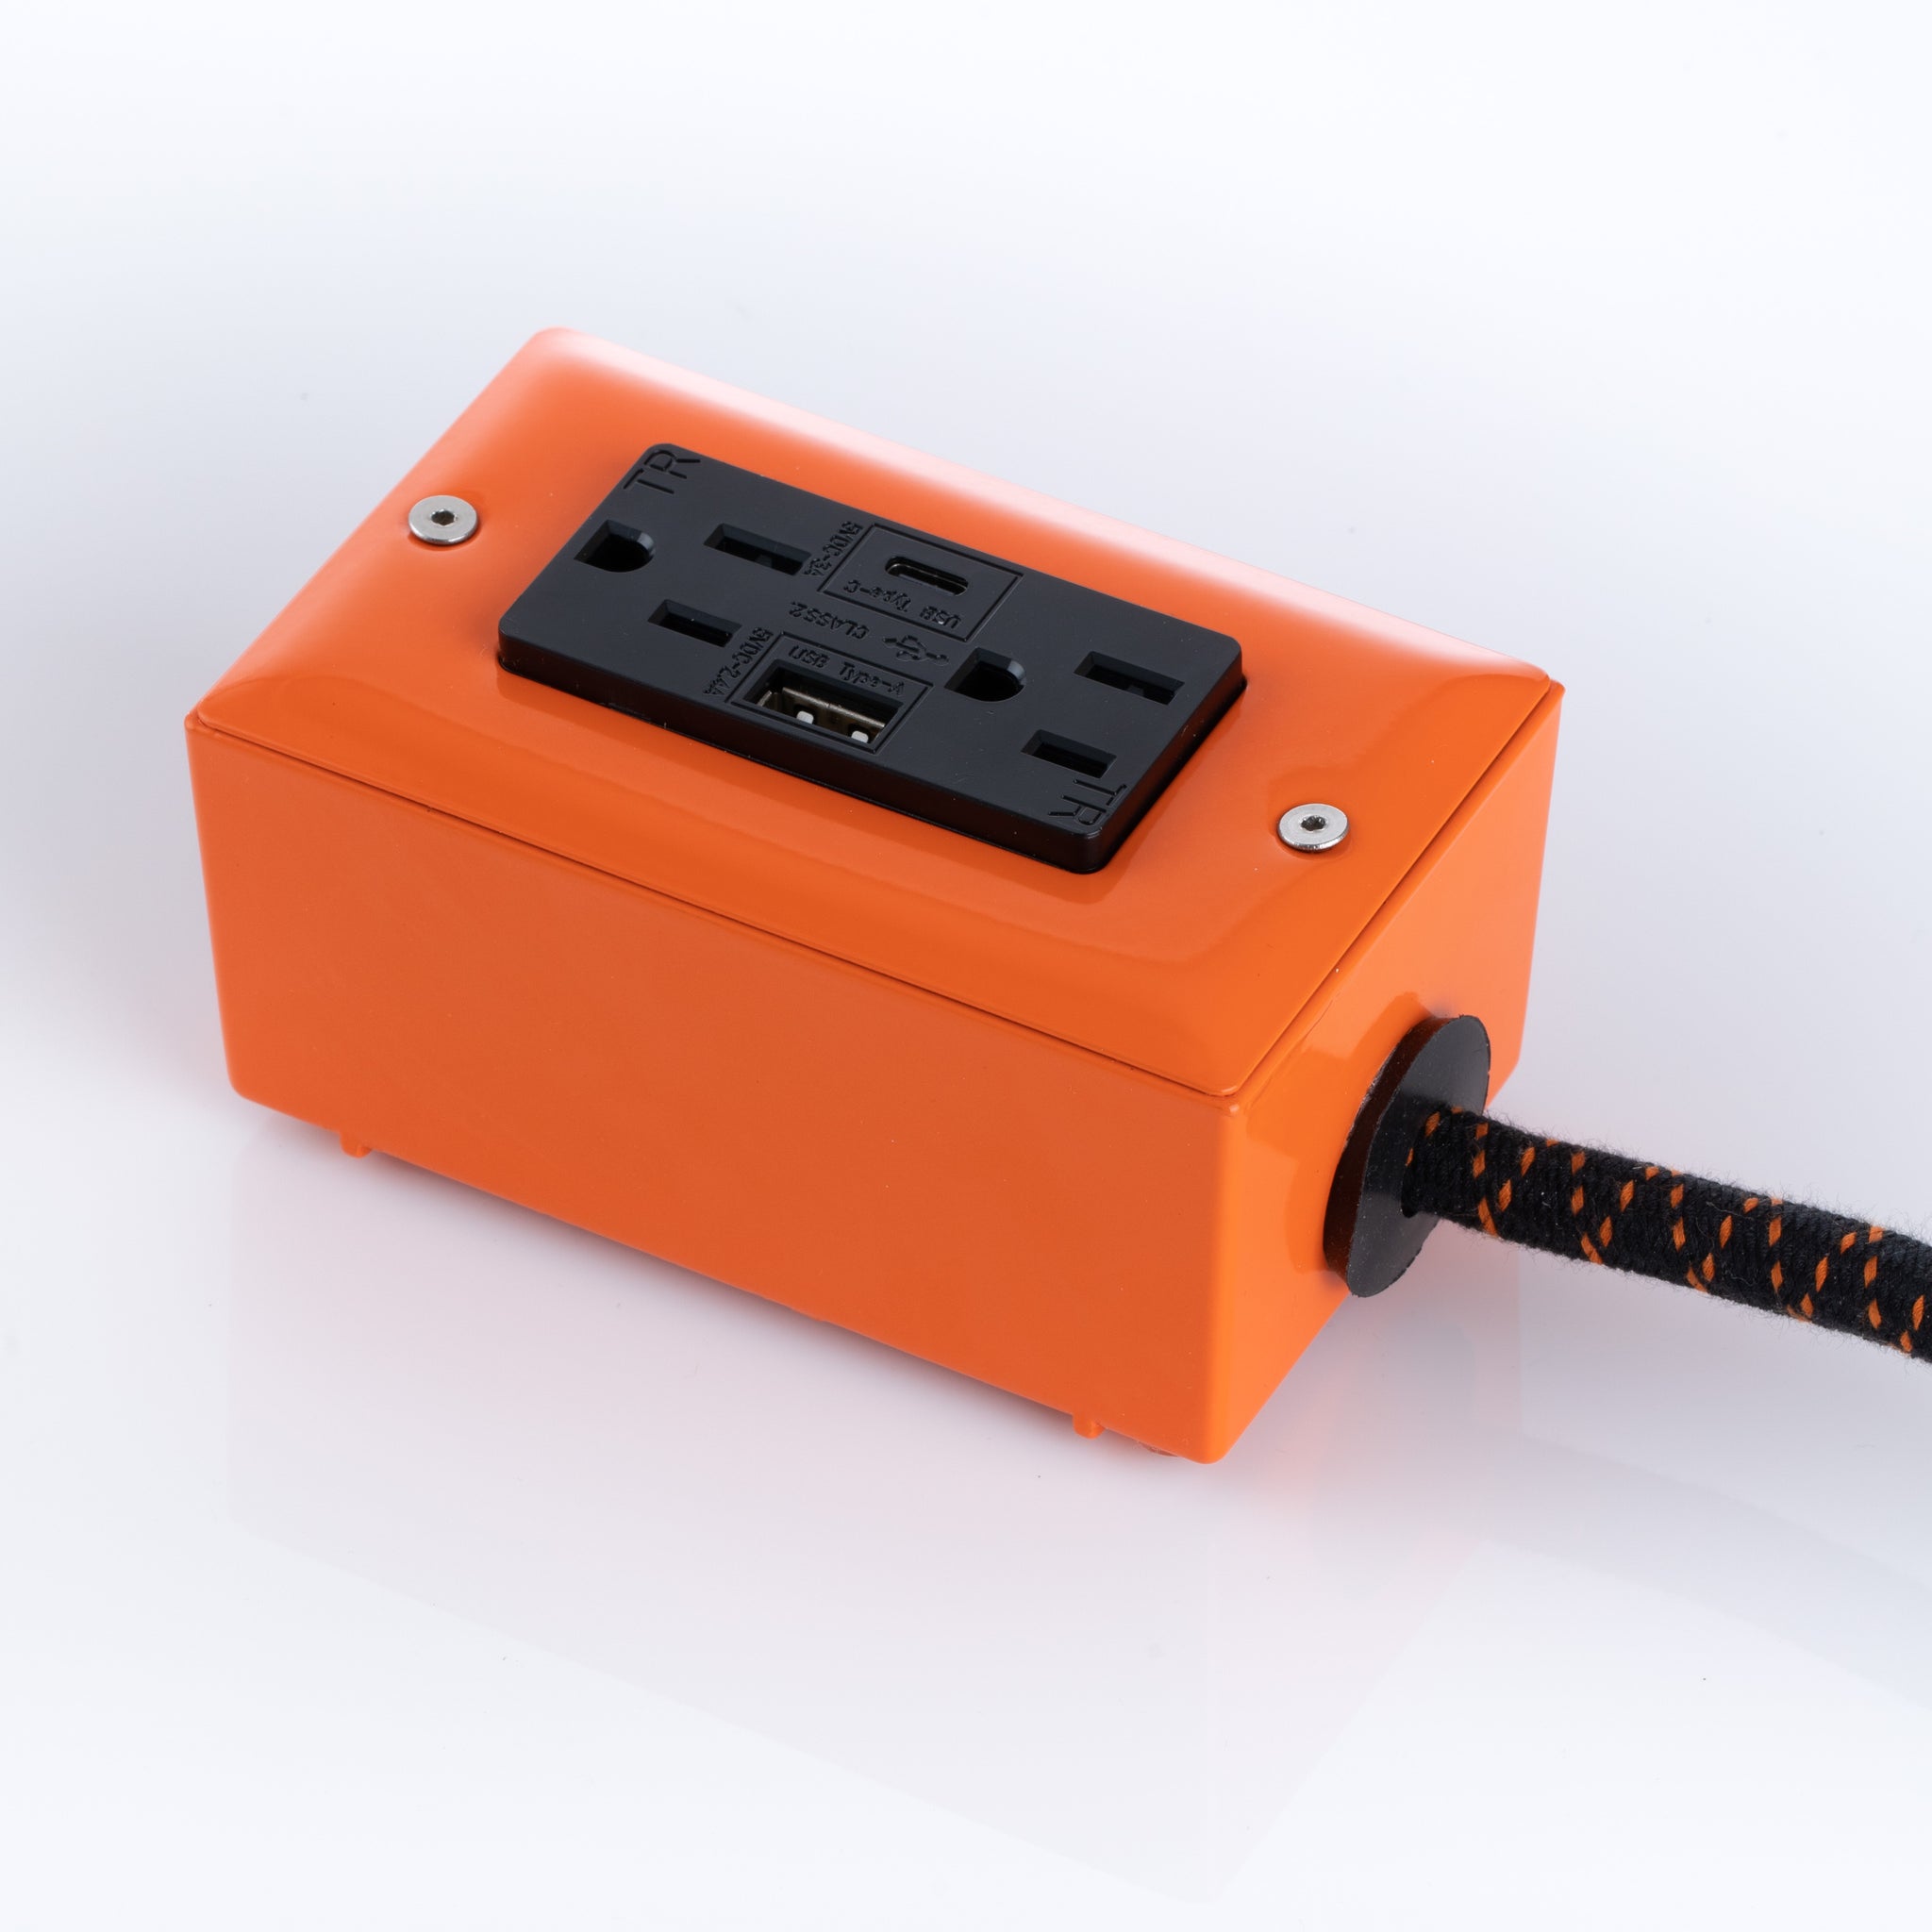 New! The First Smart Chip USB Type C® Pumpkin Orange Extension Cord - 8' Extō USBA/USBC Port, Dual-Outlet Power Cord